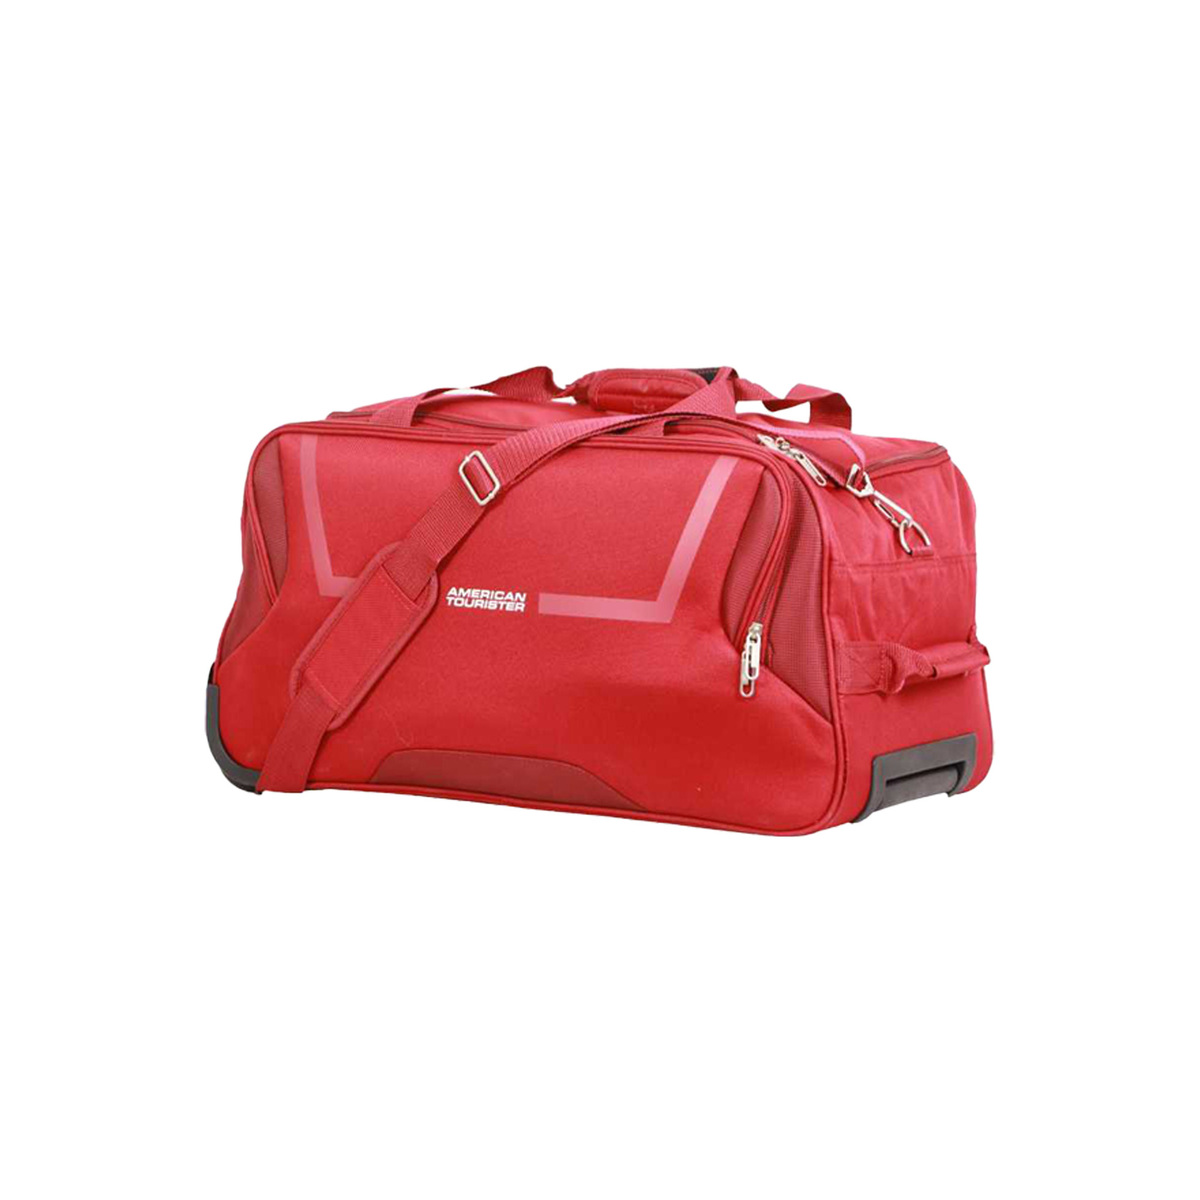 American Tourister Cosmo Duffle Bag, 57 cm, Red